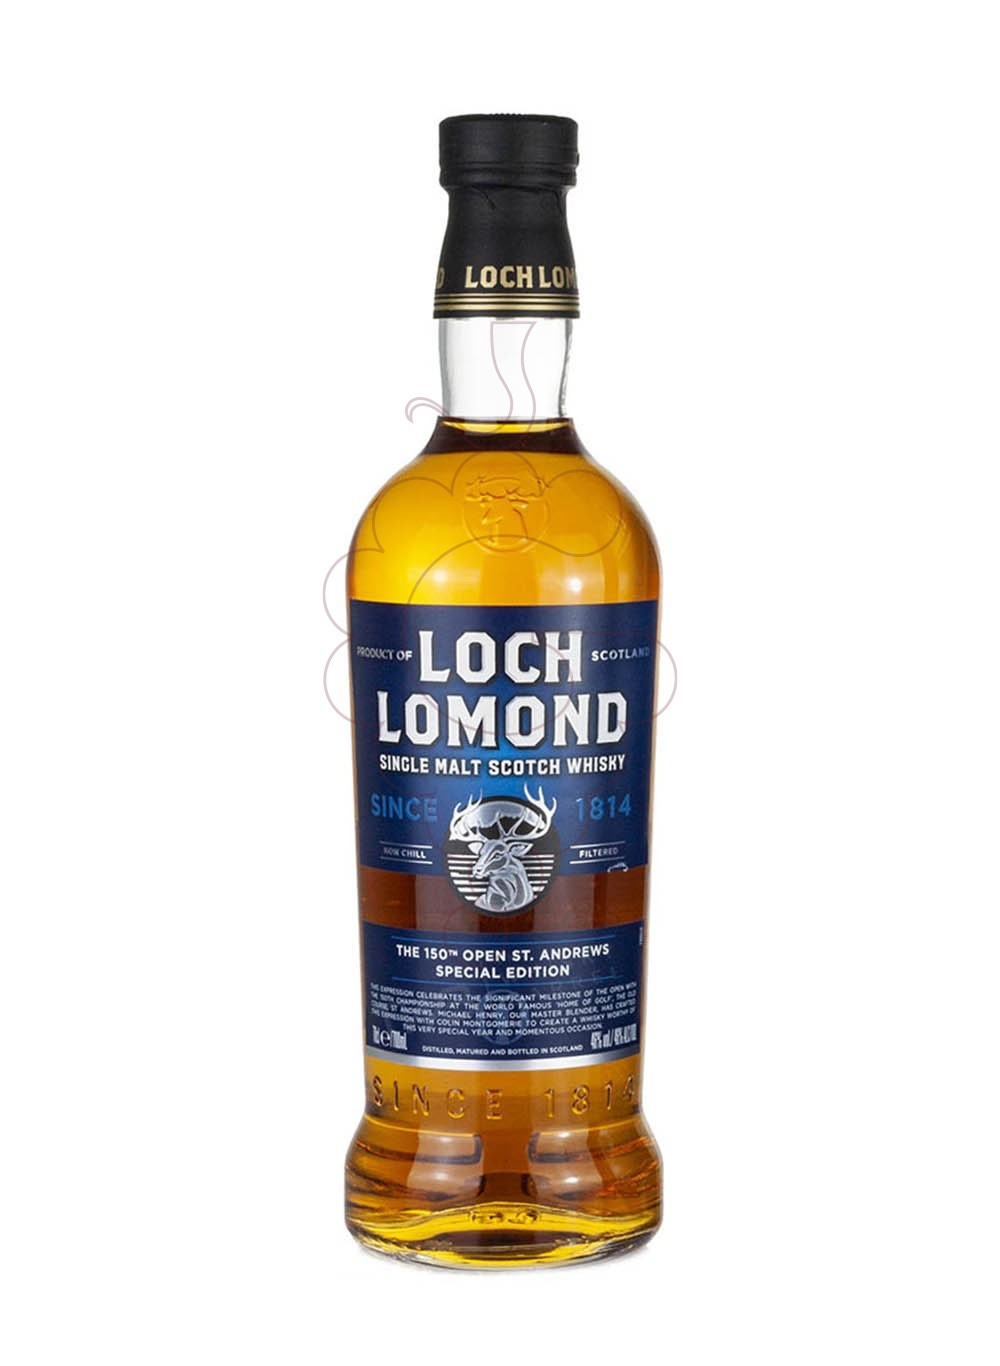 Photo Whisky Loch lomond 150th Open St. Andrews Special Ed.